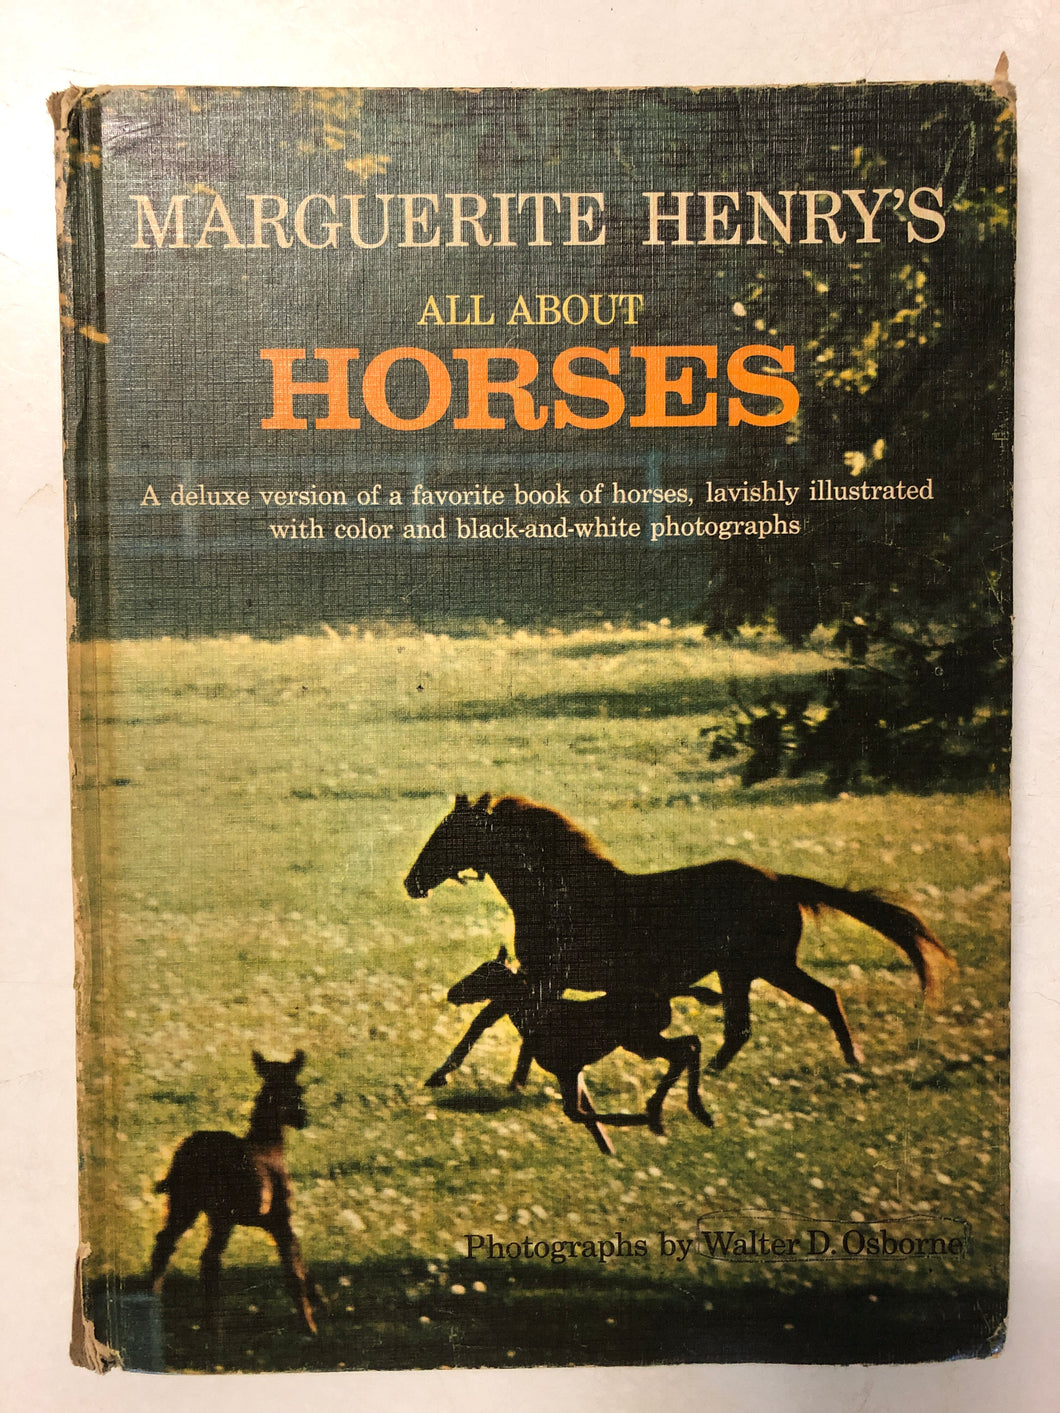 Marguerite Henry’s All About Horses - Slick Cat Books 